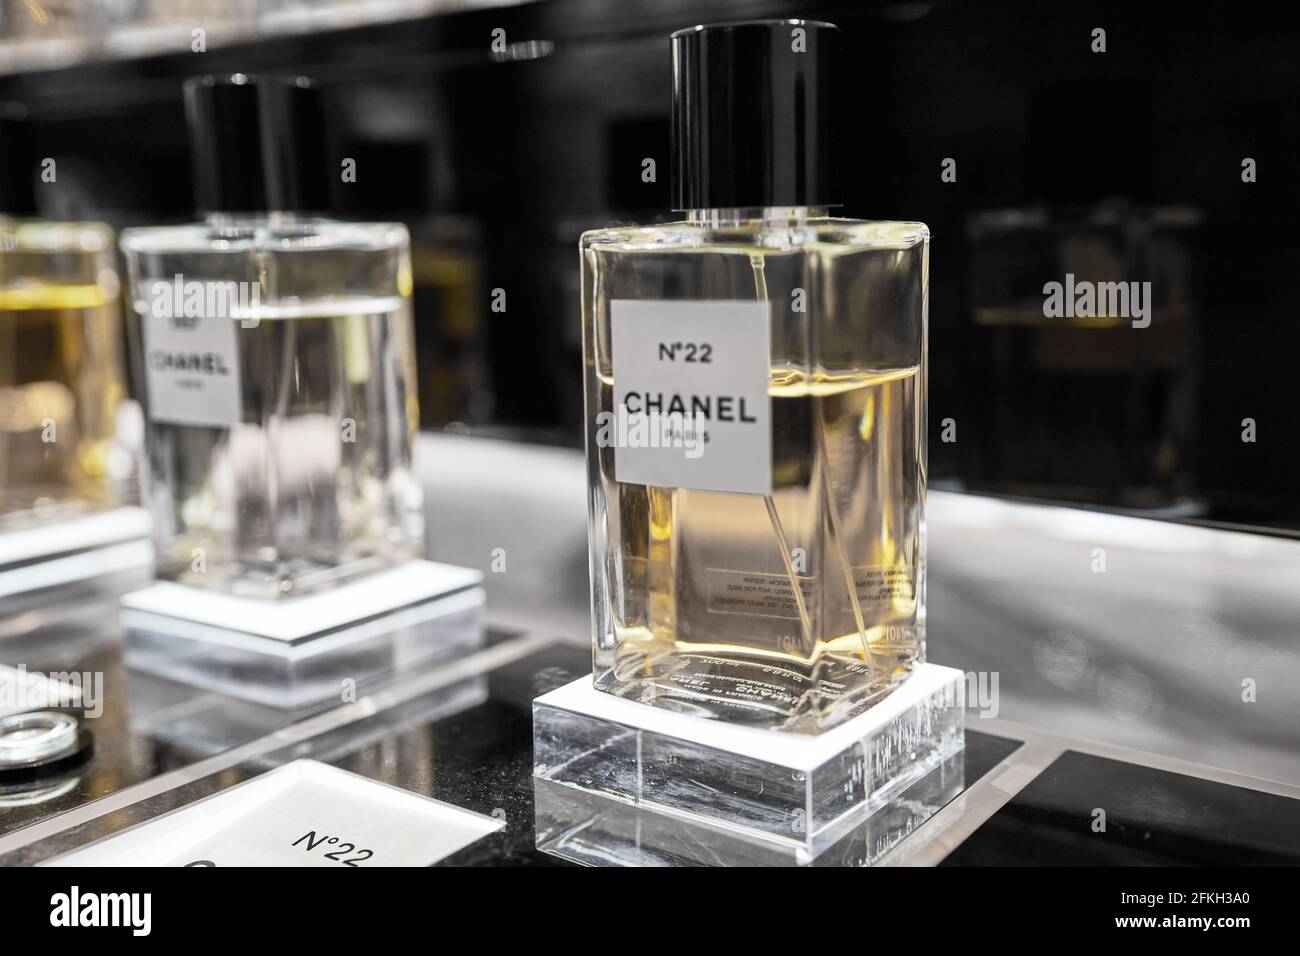 Female perfume Chanel No. 22 bottle closeup in store showcase. Perspective view of french Chanel perfume collection. Milan, Italy - December 15, 2020. Stock Photo